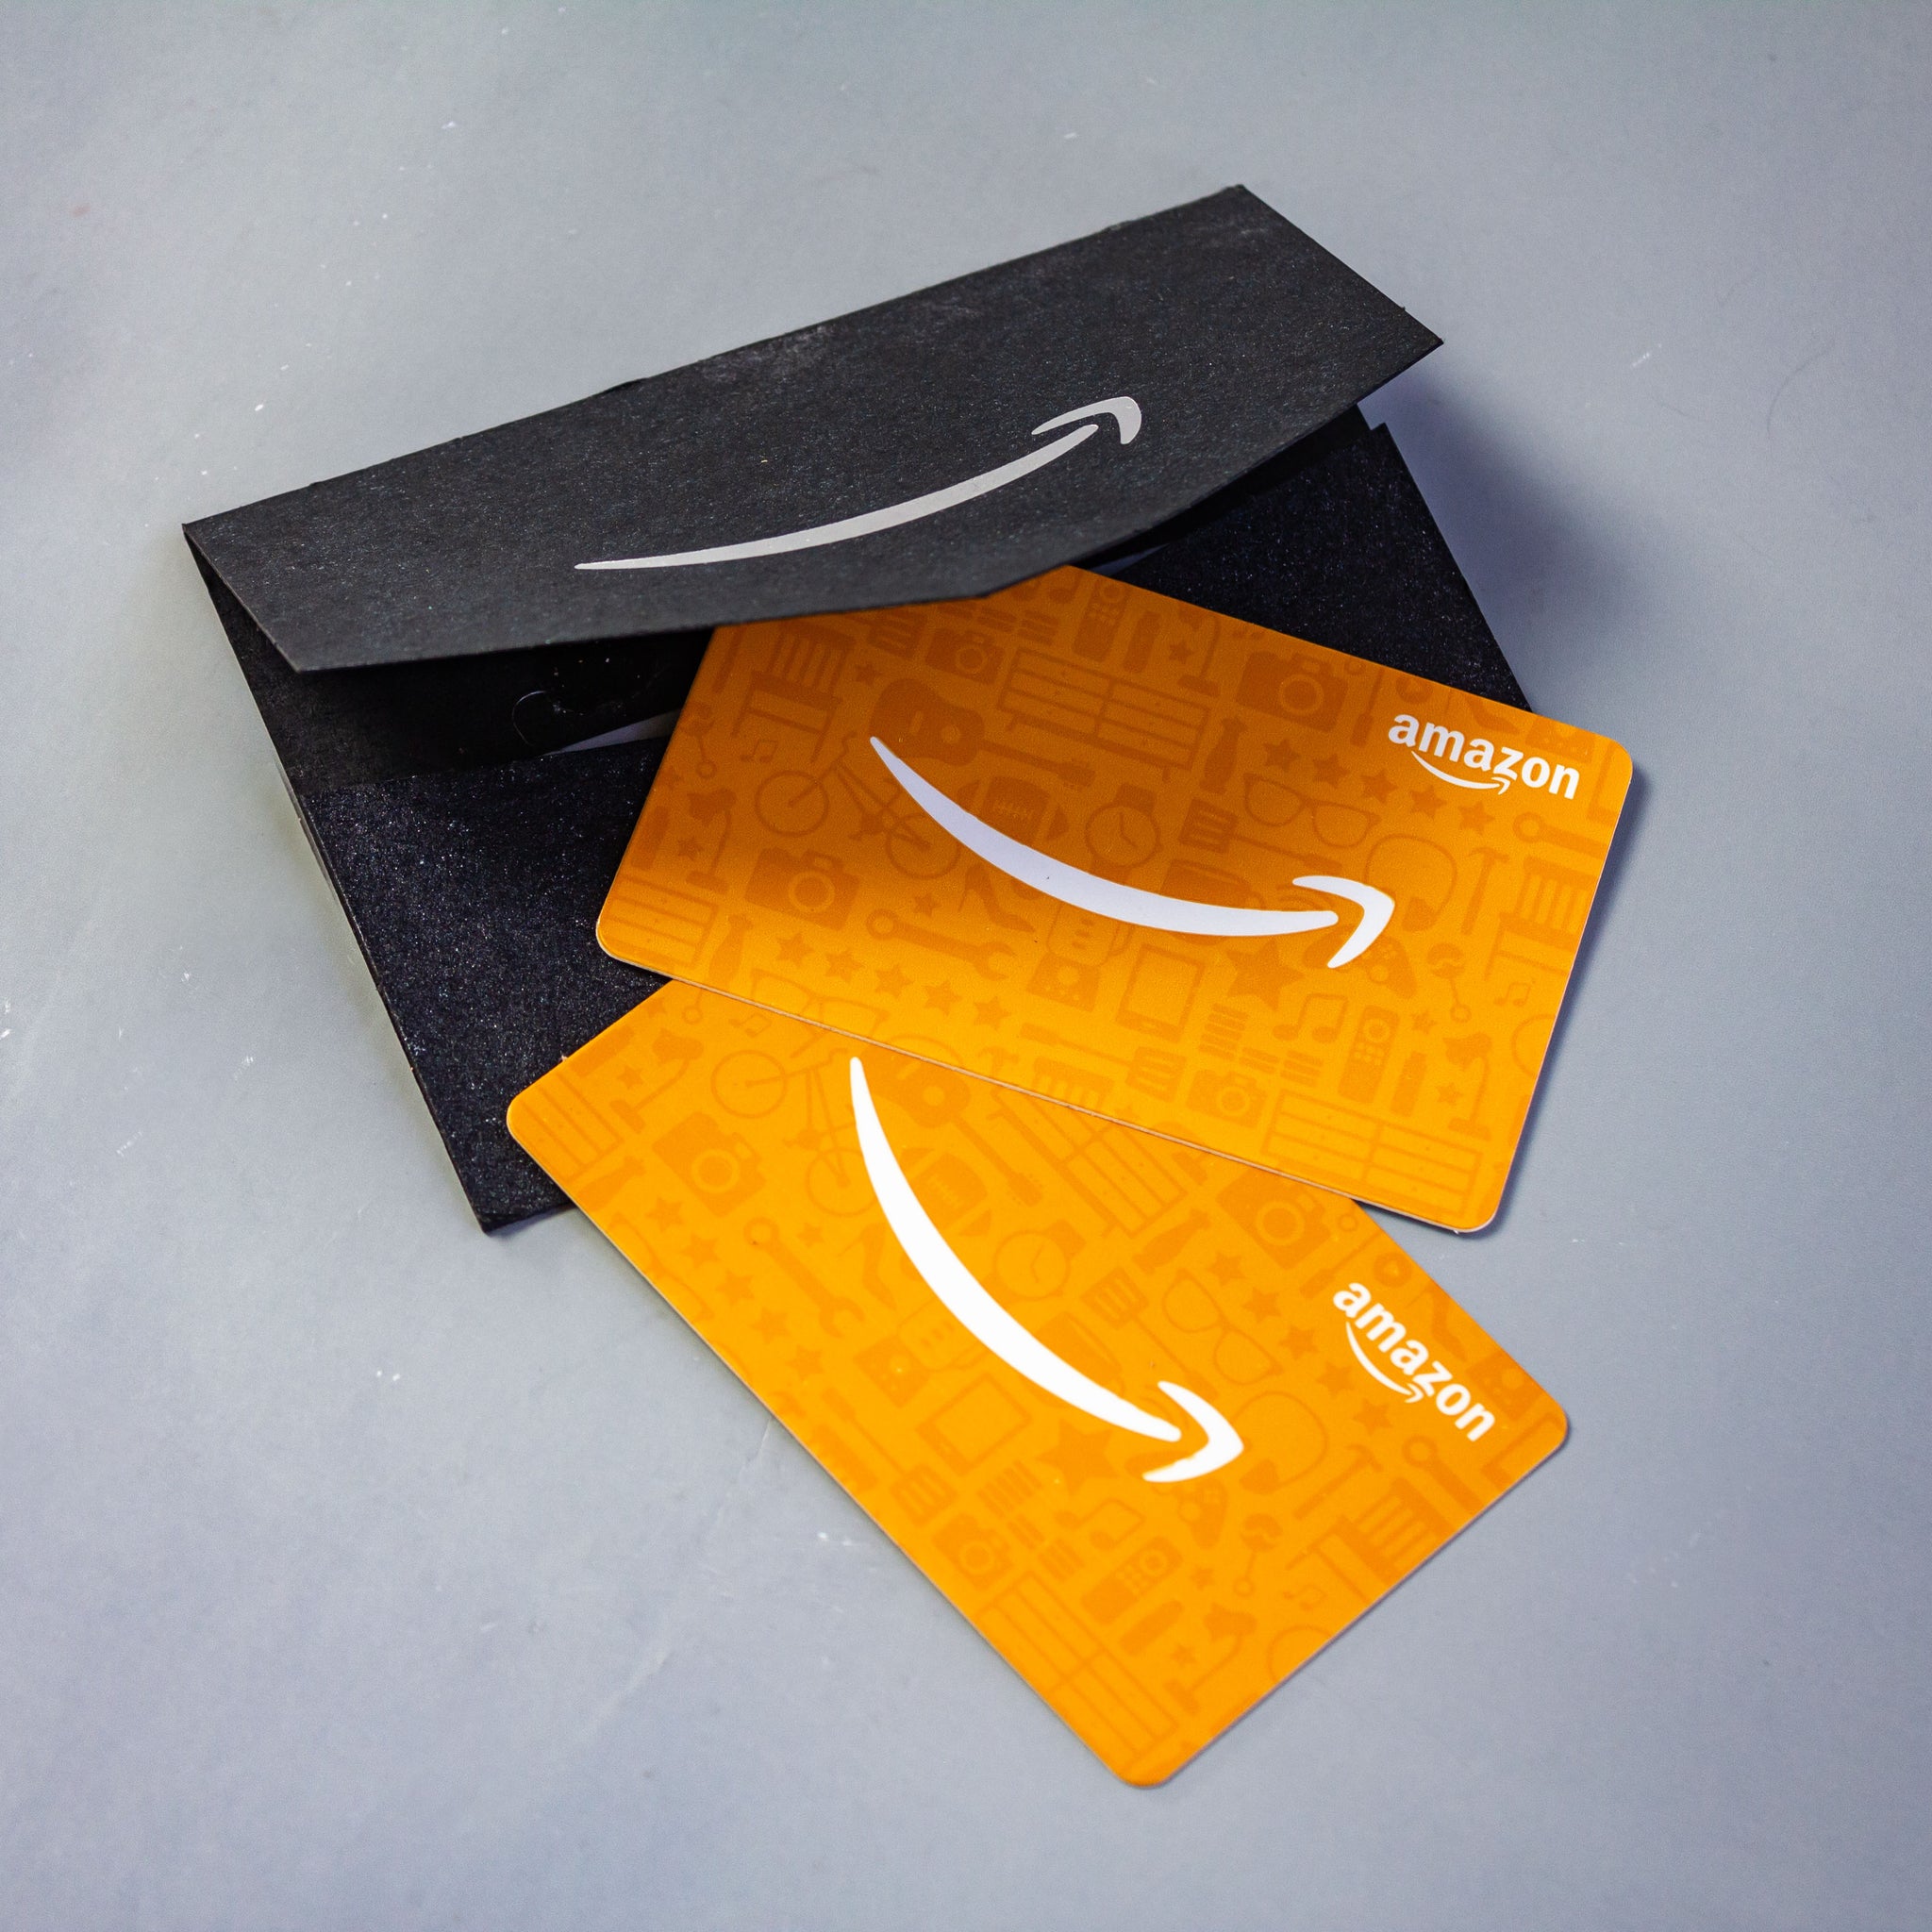 Amazon.in: Good Luck (Group gifting) - Amazon Pay eGift Card: Gift Cards